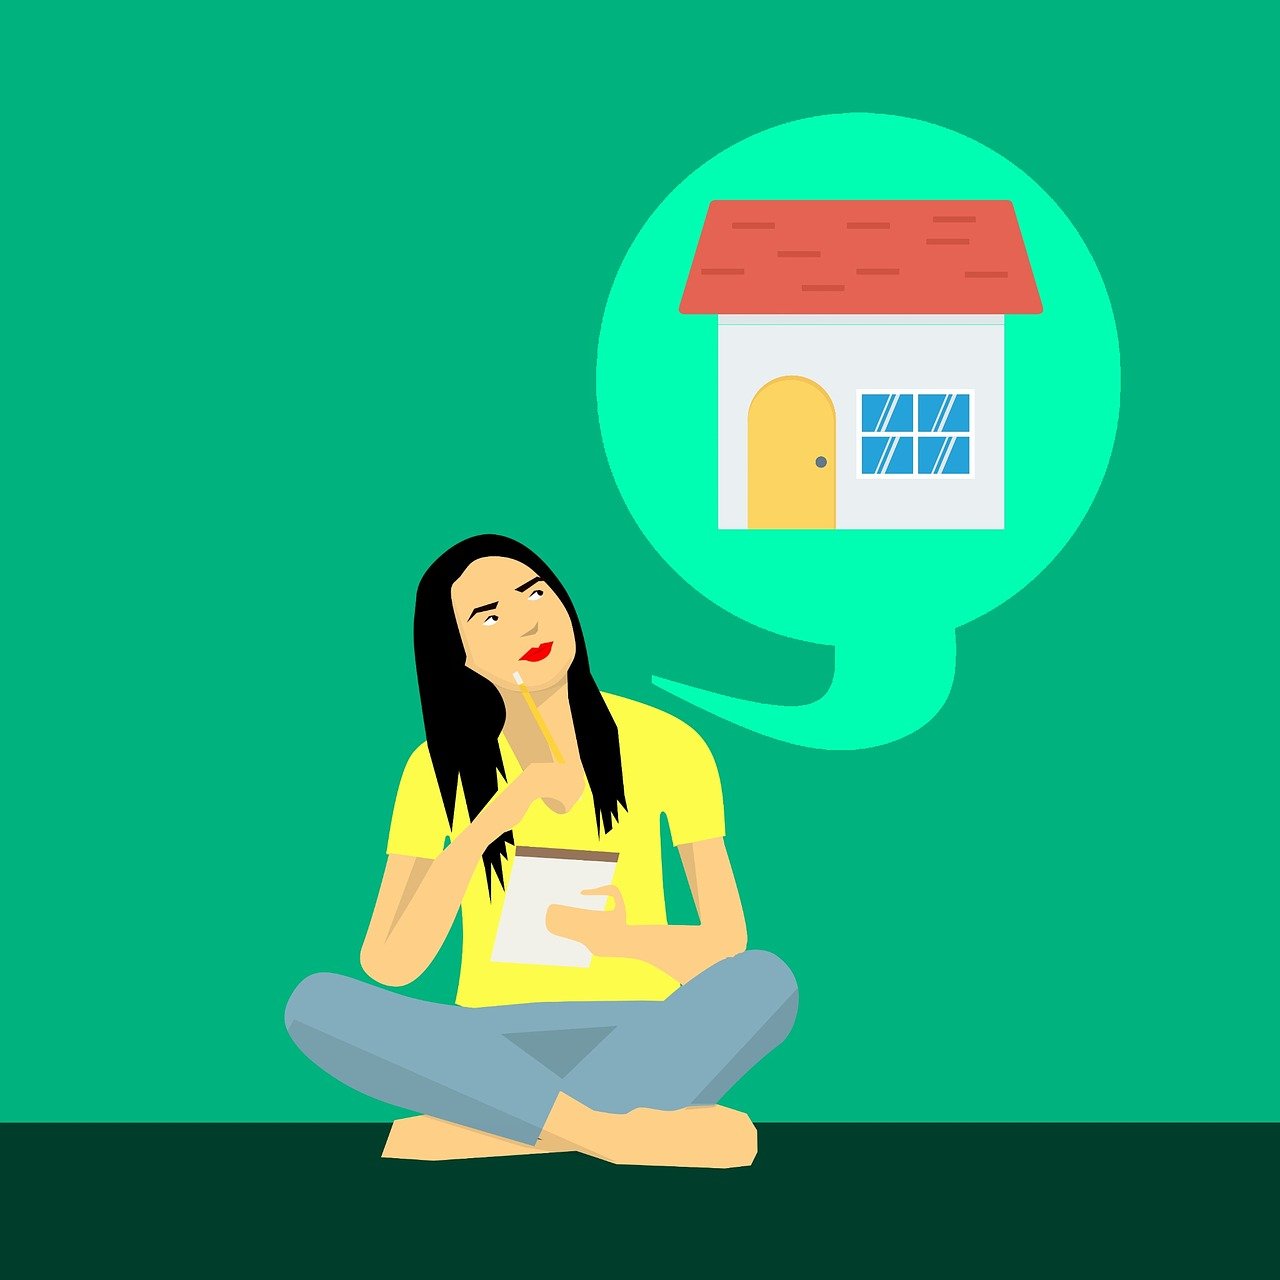 Animated cartoon of a woman sitting on the floor, with a thought bubble depicting an image of a house.